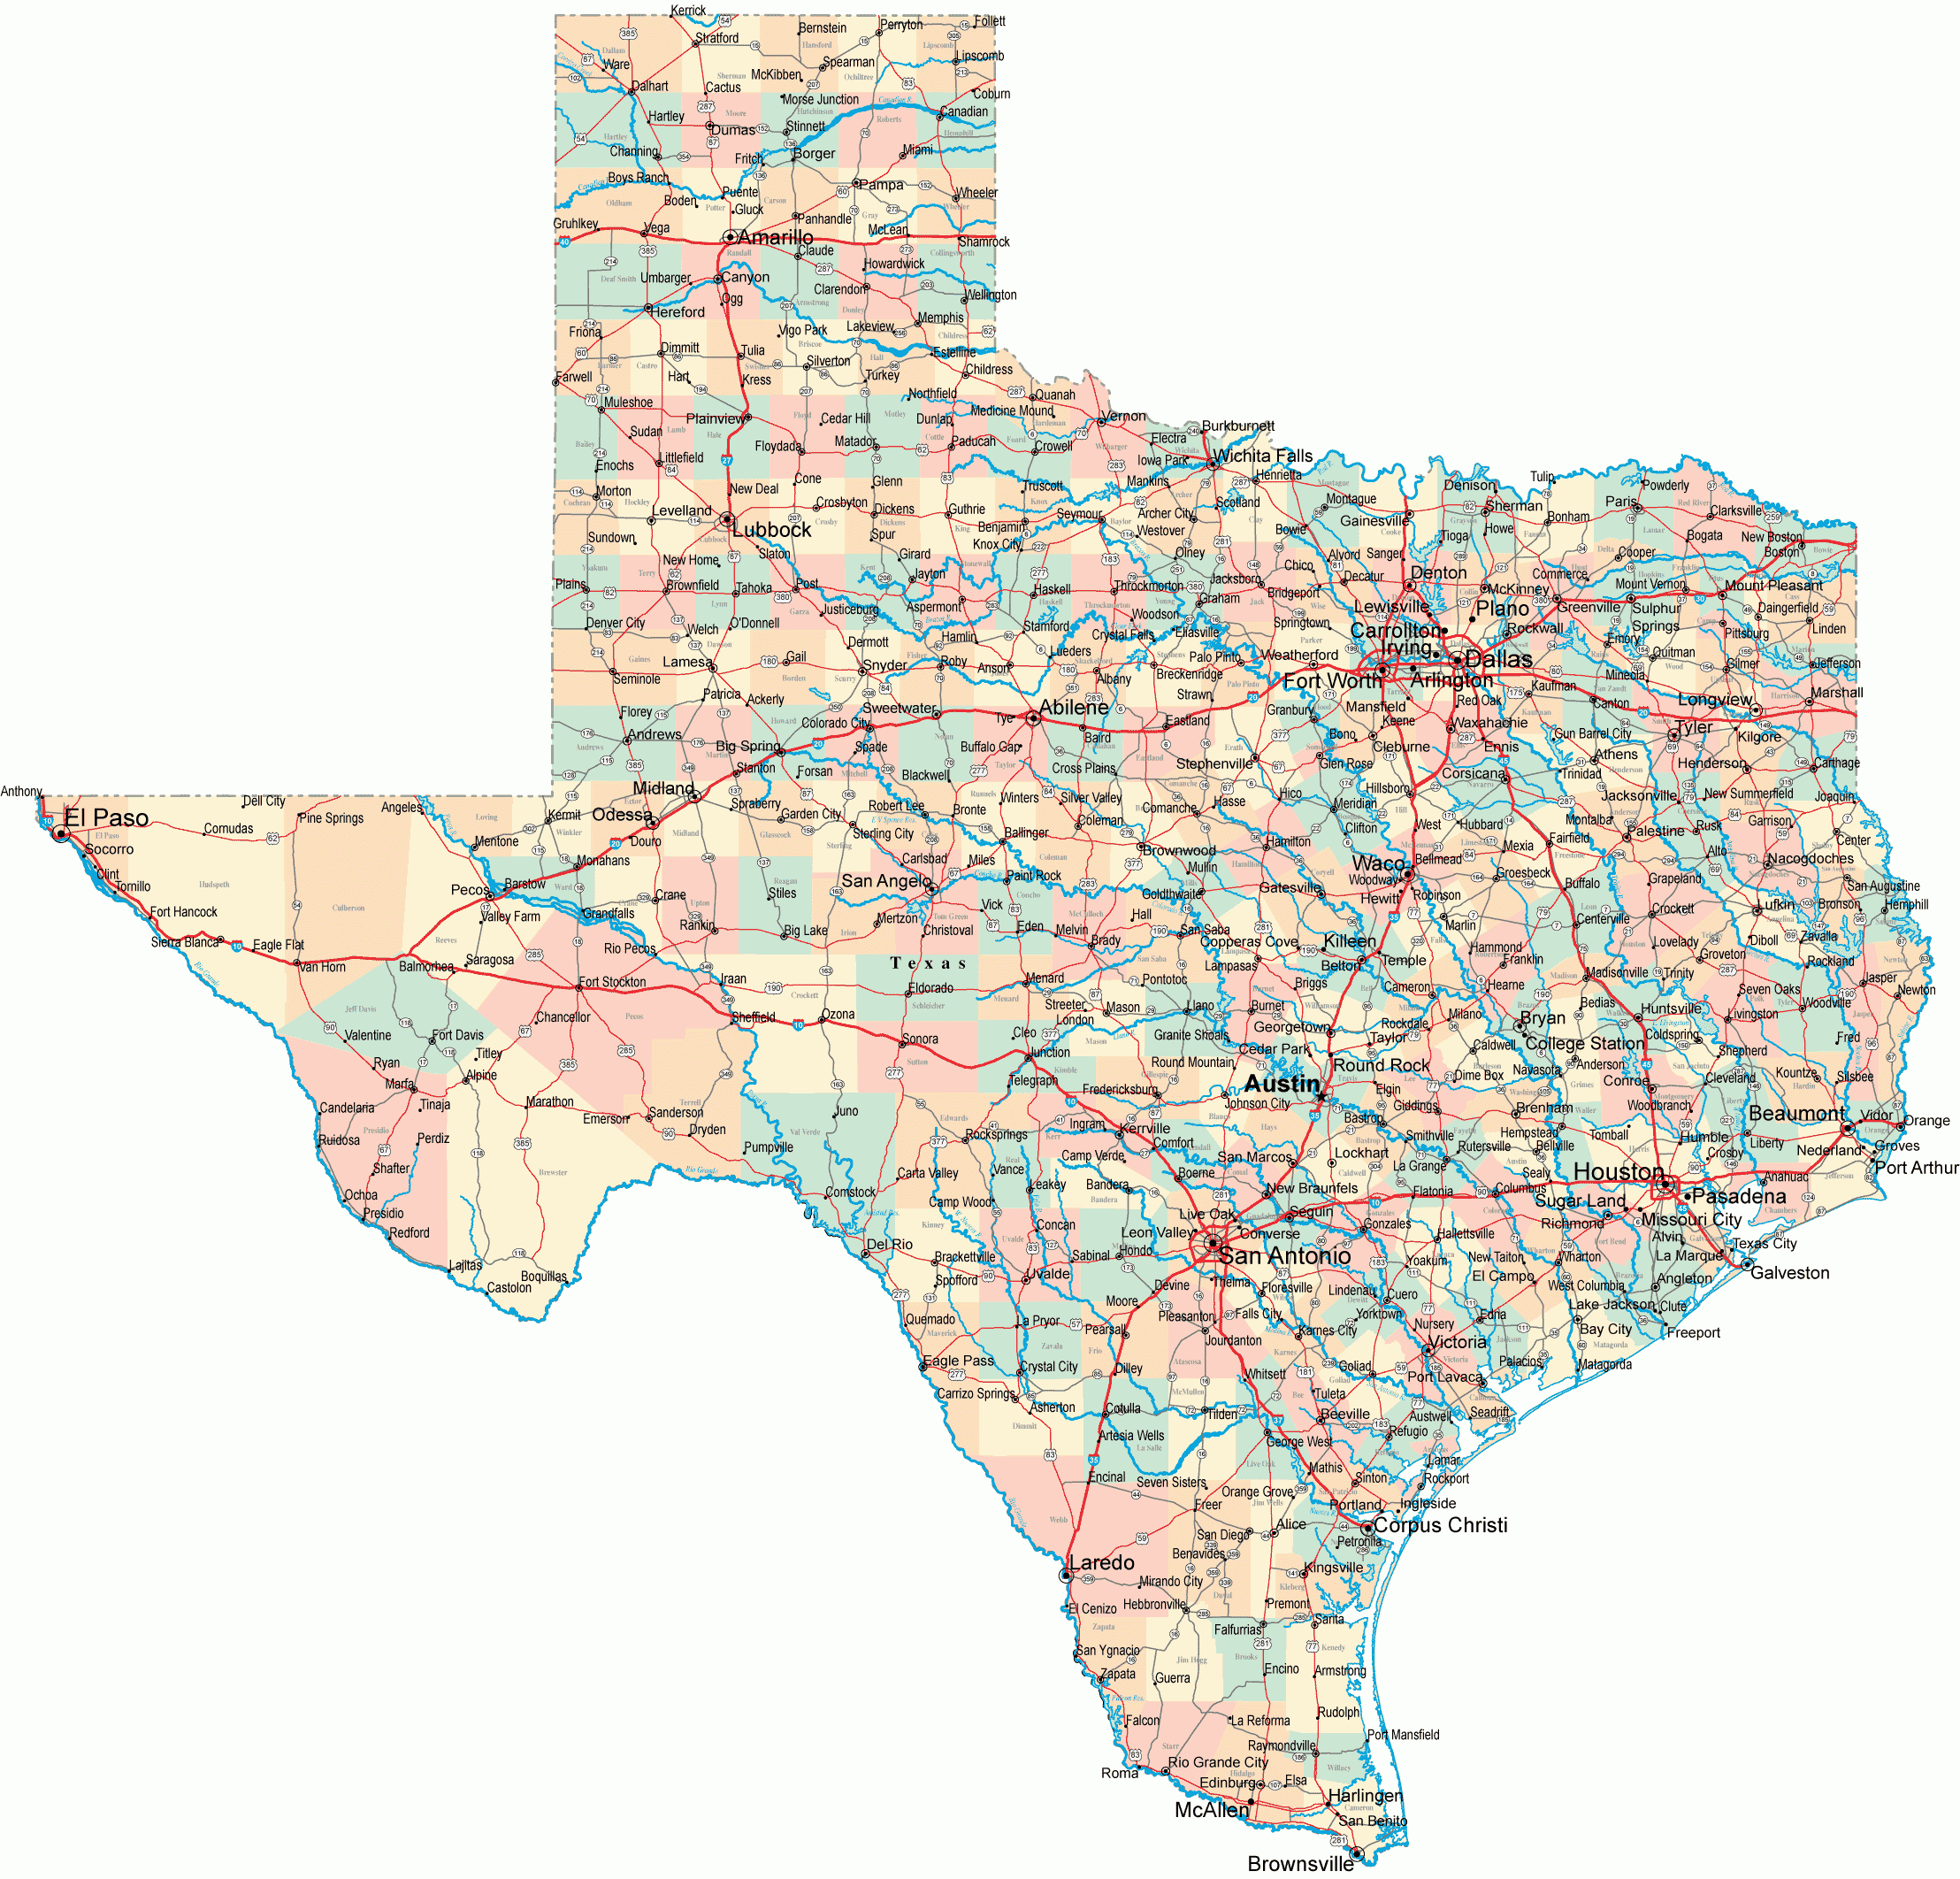 Texas Road Map - Tx Road Map - Texas Highway Map - North Texas Highway Map